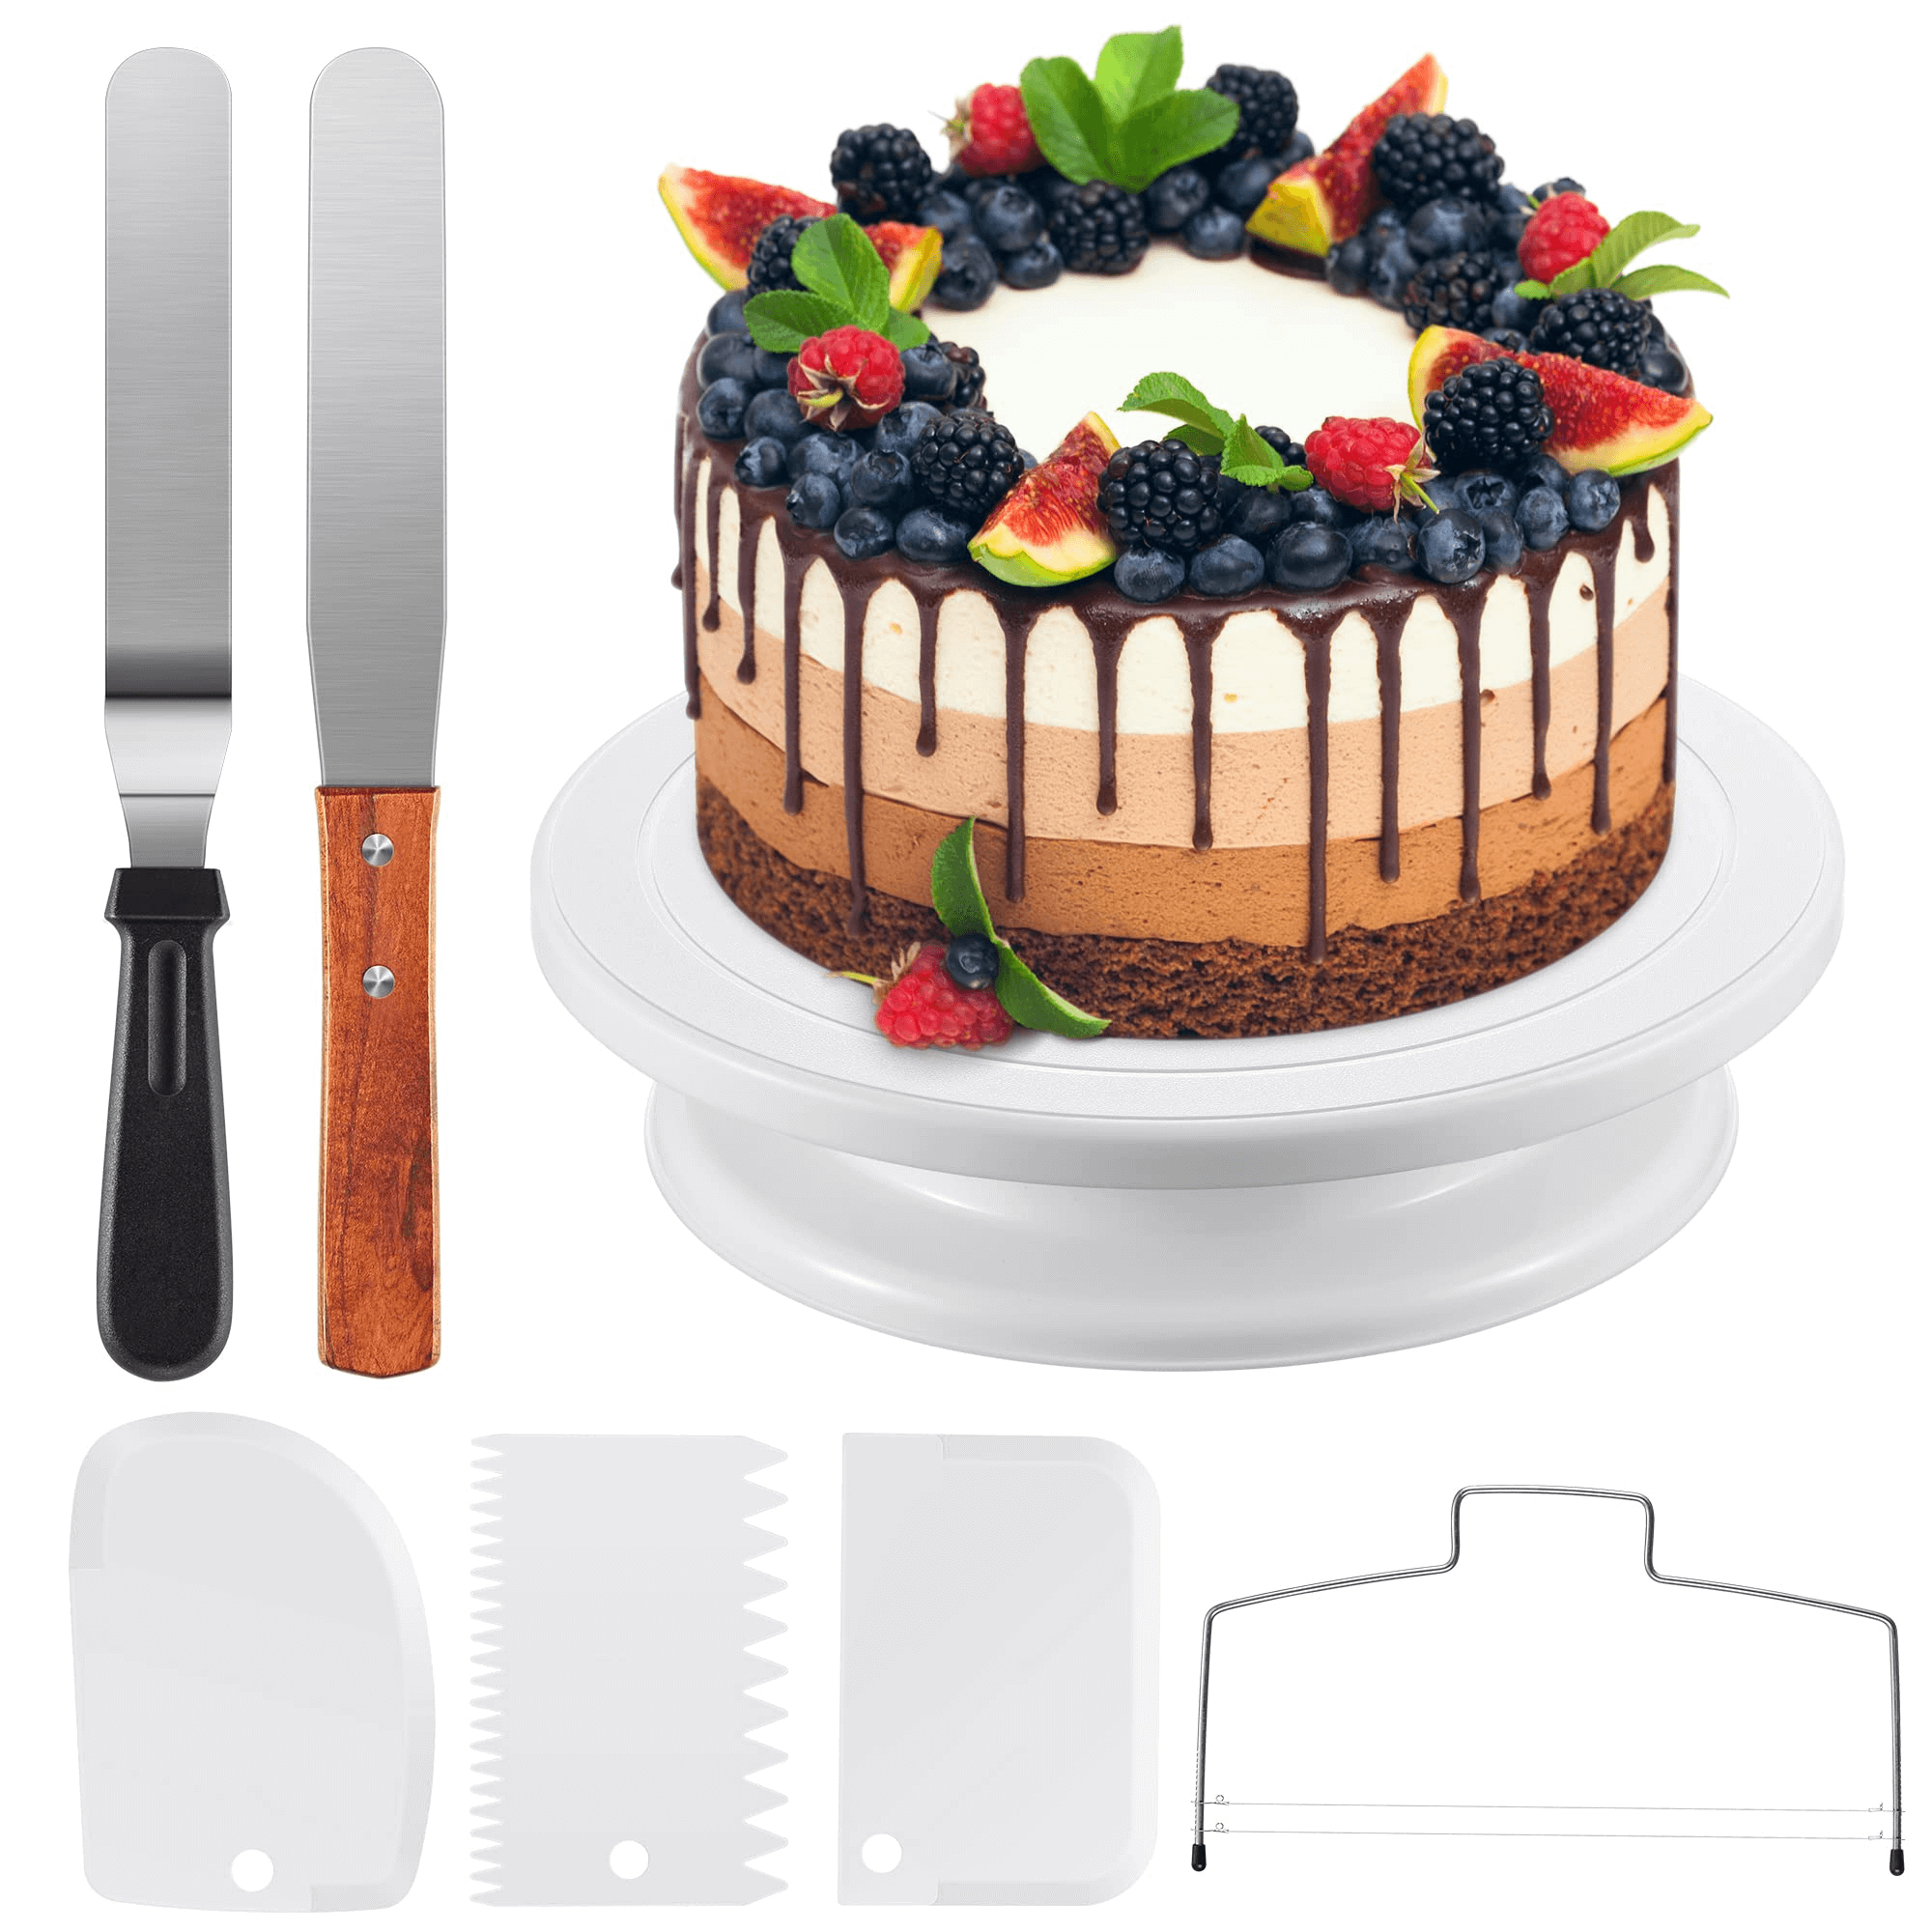 11 Inch Non Slip Cake Turntable for Decorating,Rotating Cake Stand with 2  Icing Spatula,Cake Decorating Tools Supplies with 3 Icing Smoother 1 Cake